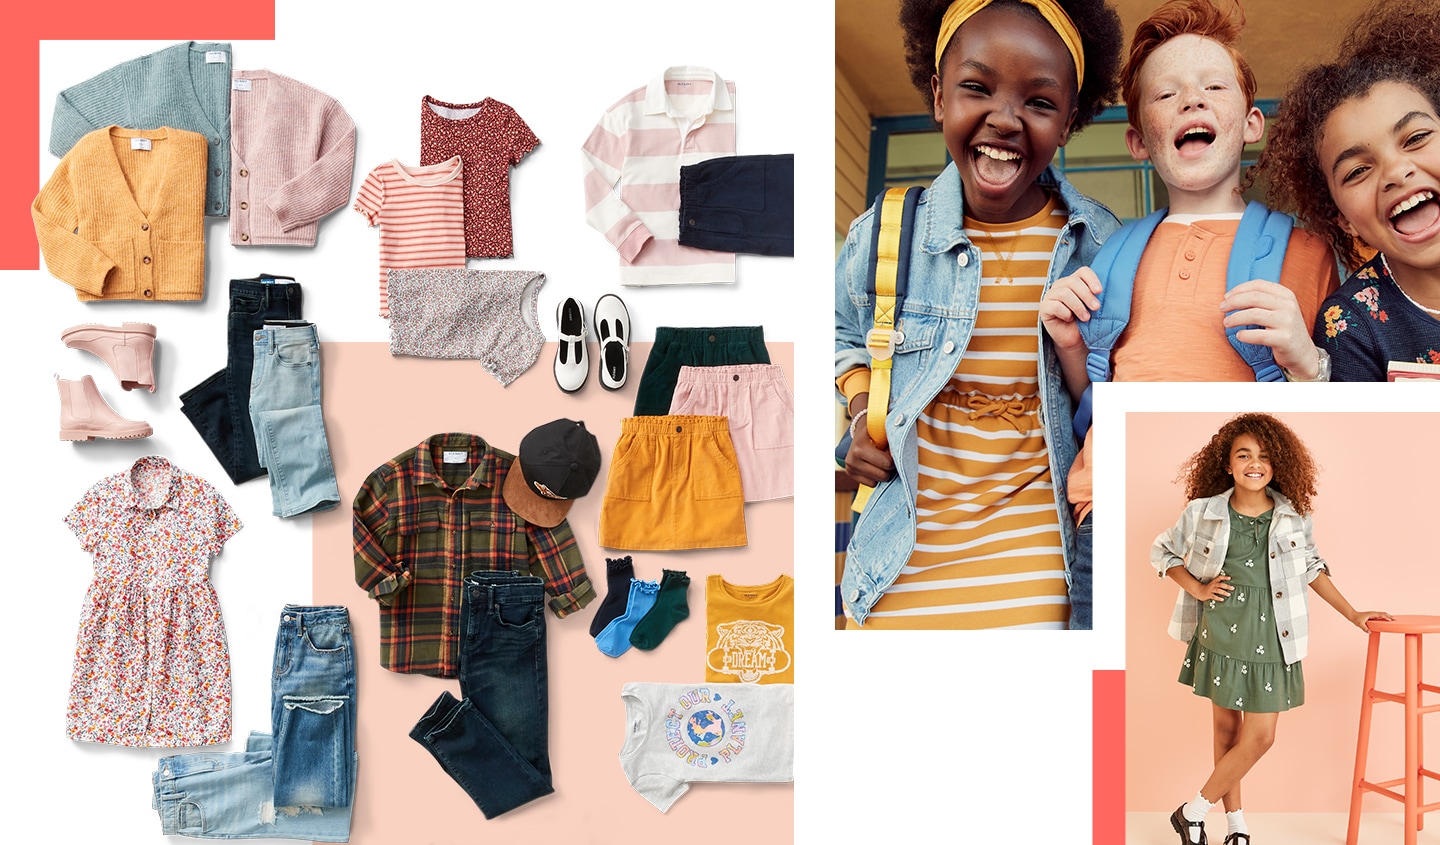 A layout of cardigans, dresses, corduroy skirts, flannels, andstriped tees in various fall colors.